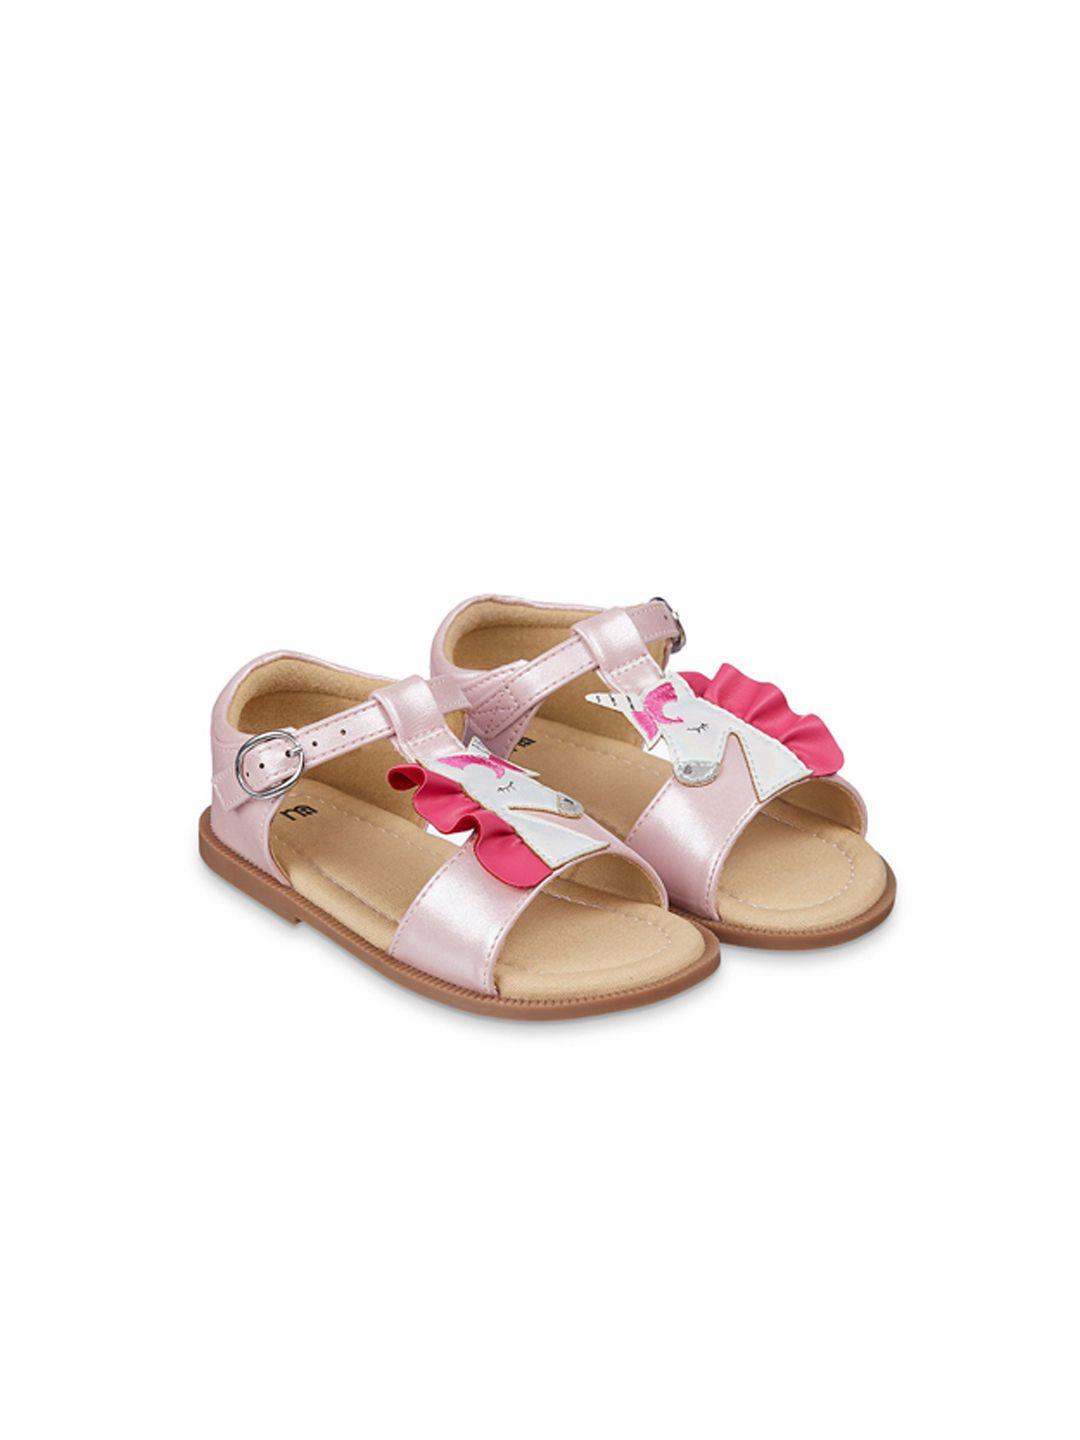 mothercare girls pink open toe flats